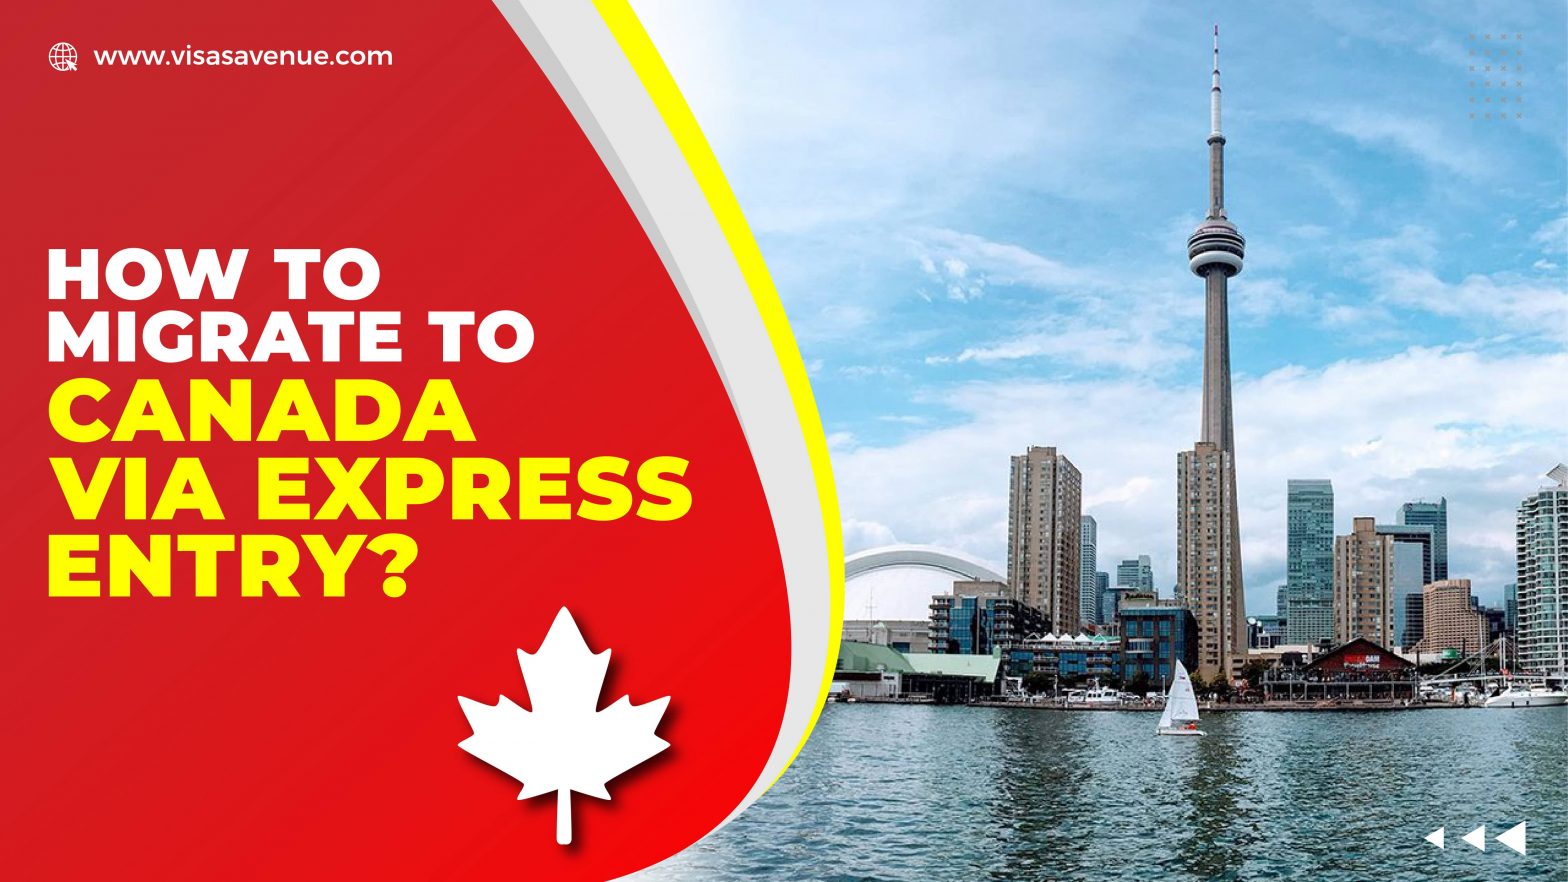 How to migrate to Canada via Express Entry